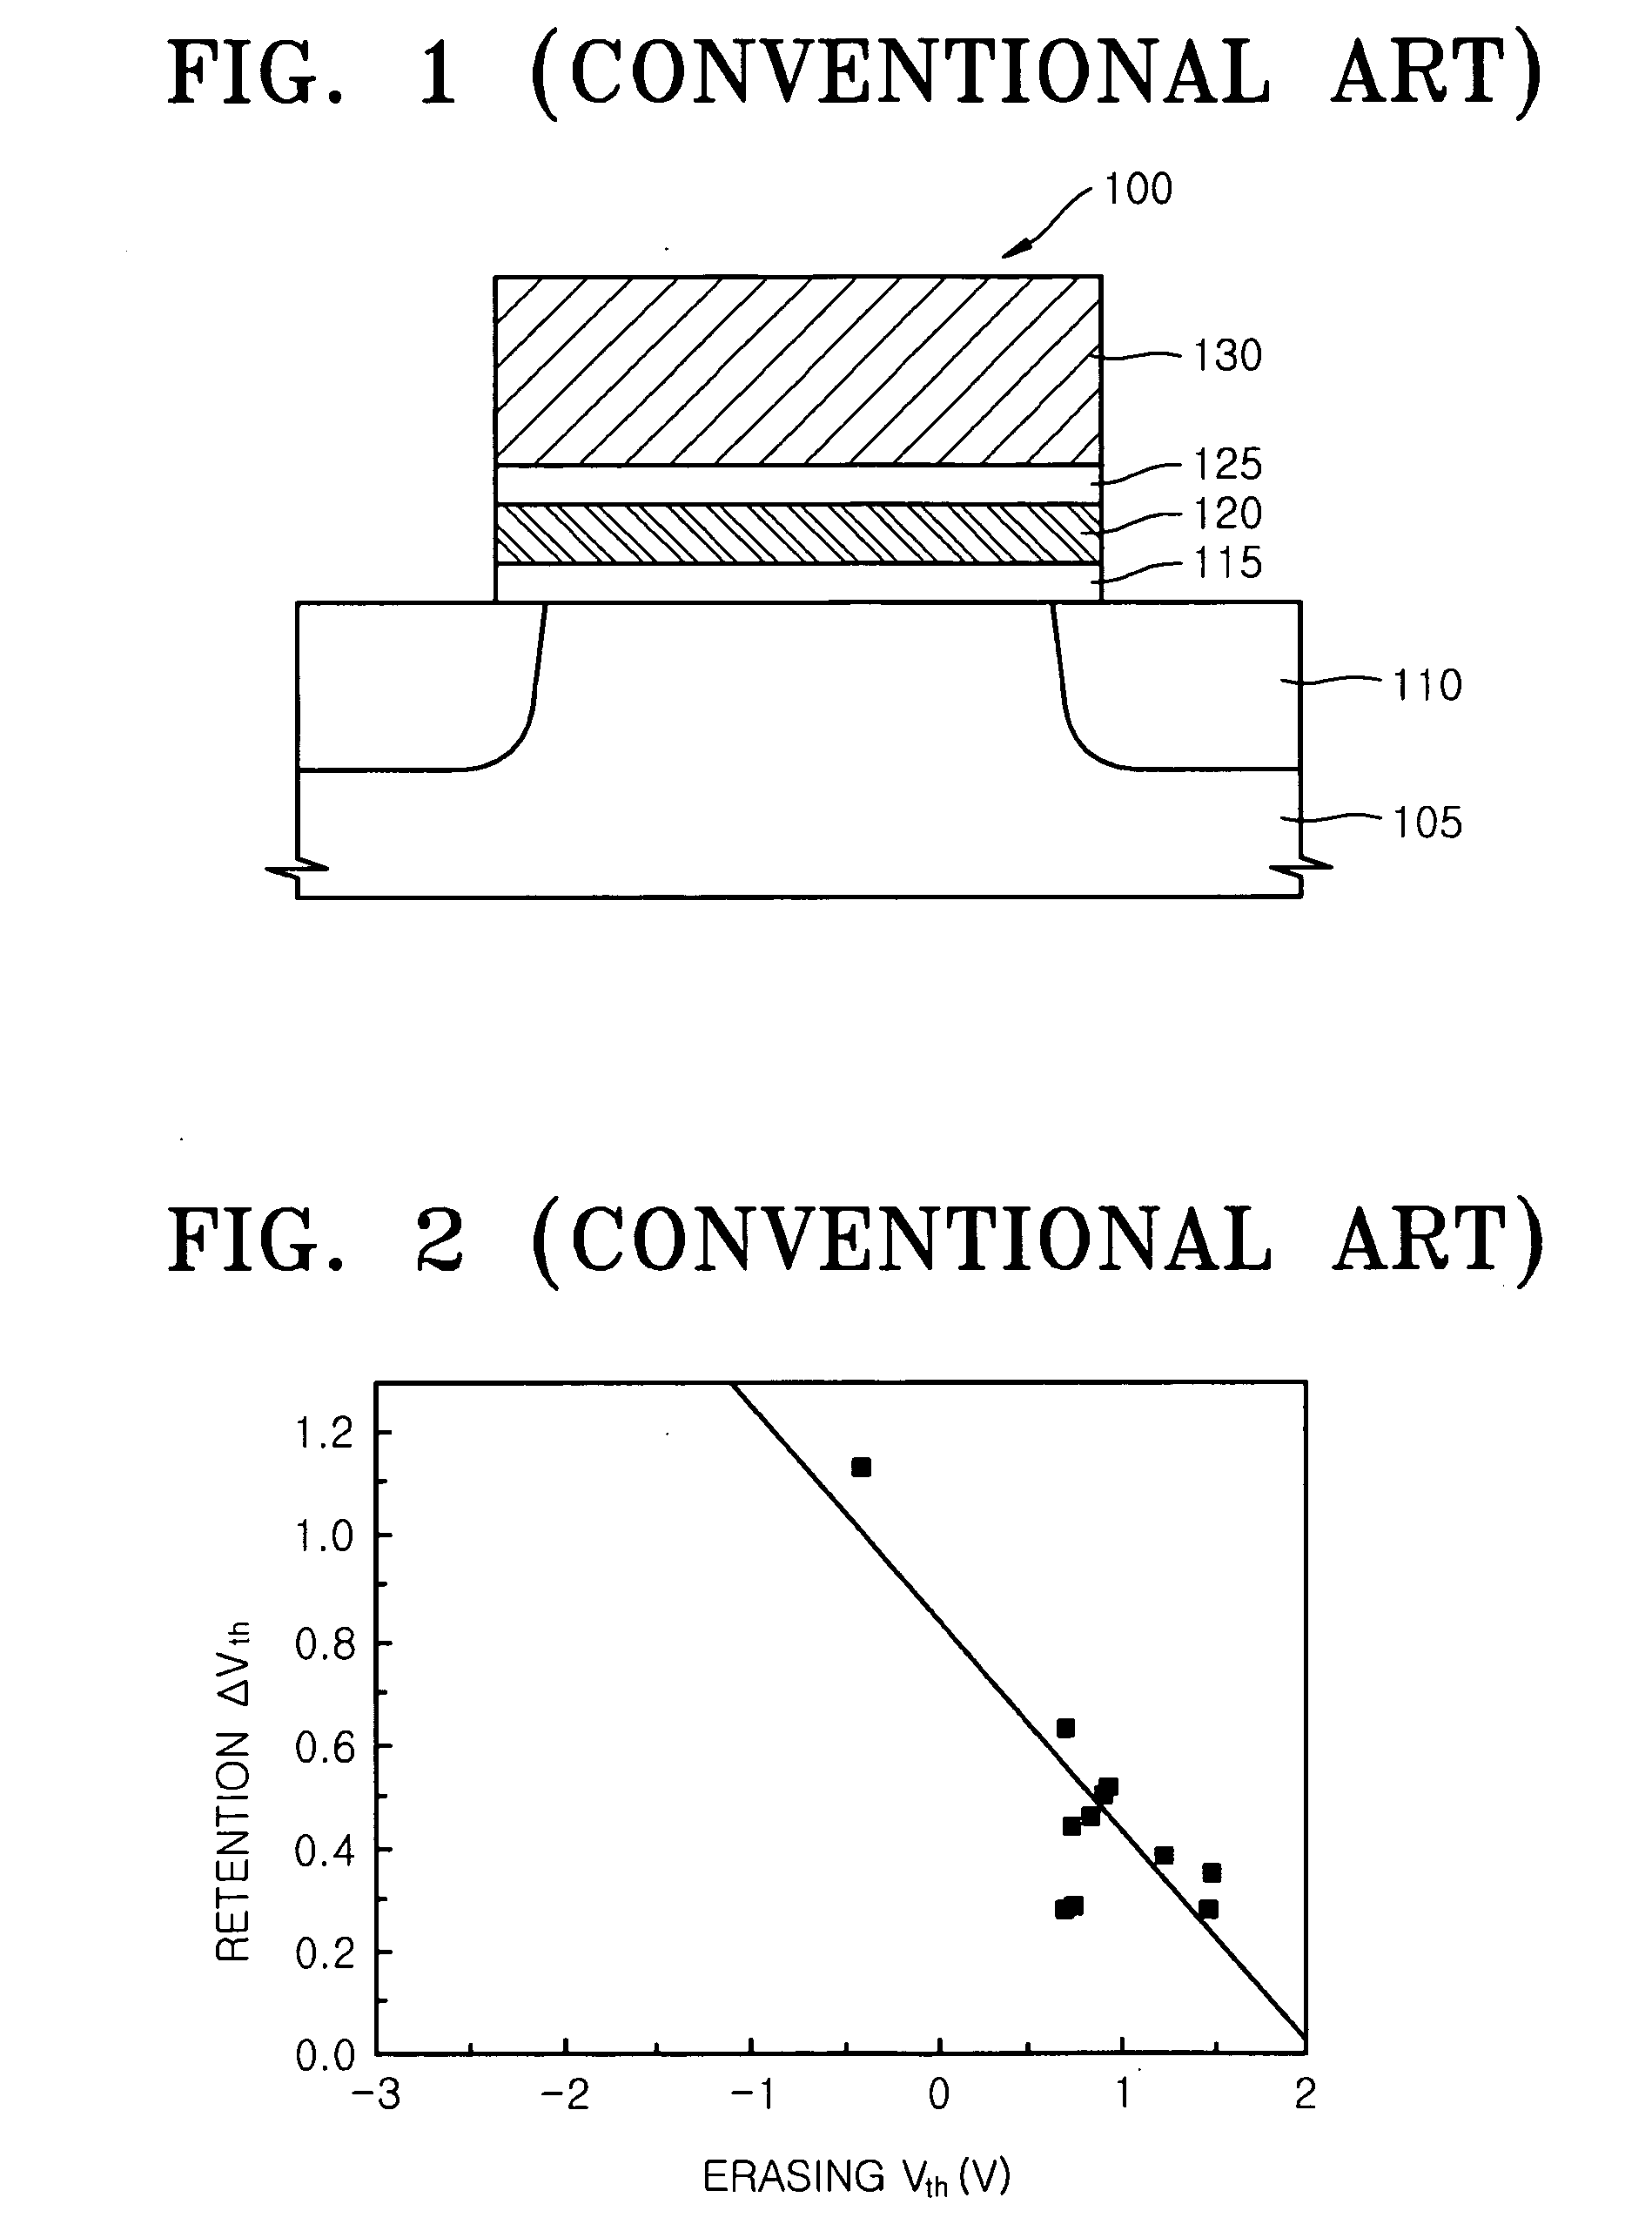 Nonvolatile memory device having a plurality of trapping films